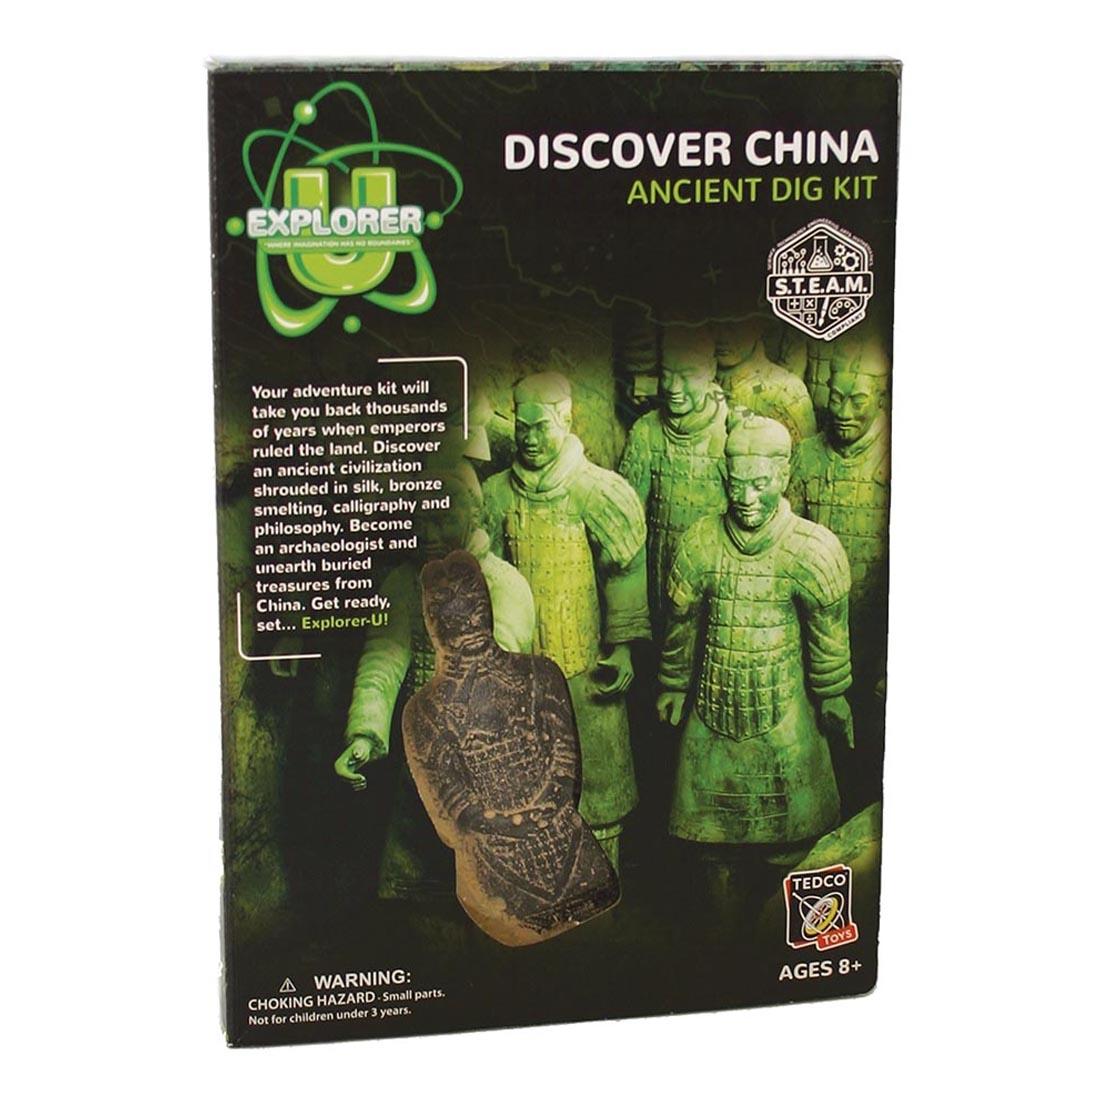 Discover China Ancient Dig Kit by Tedco